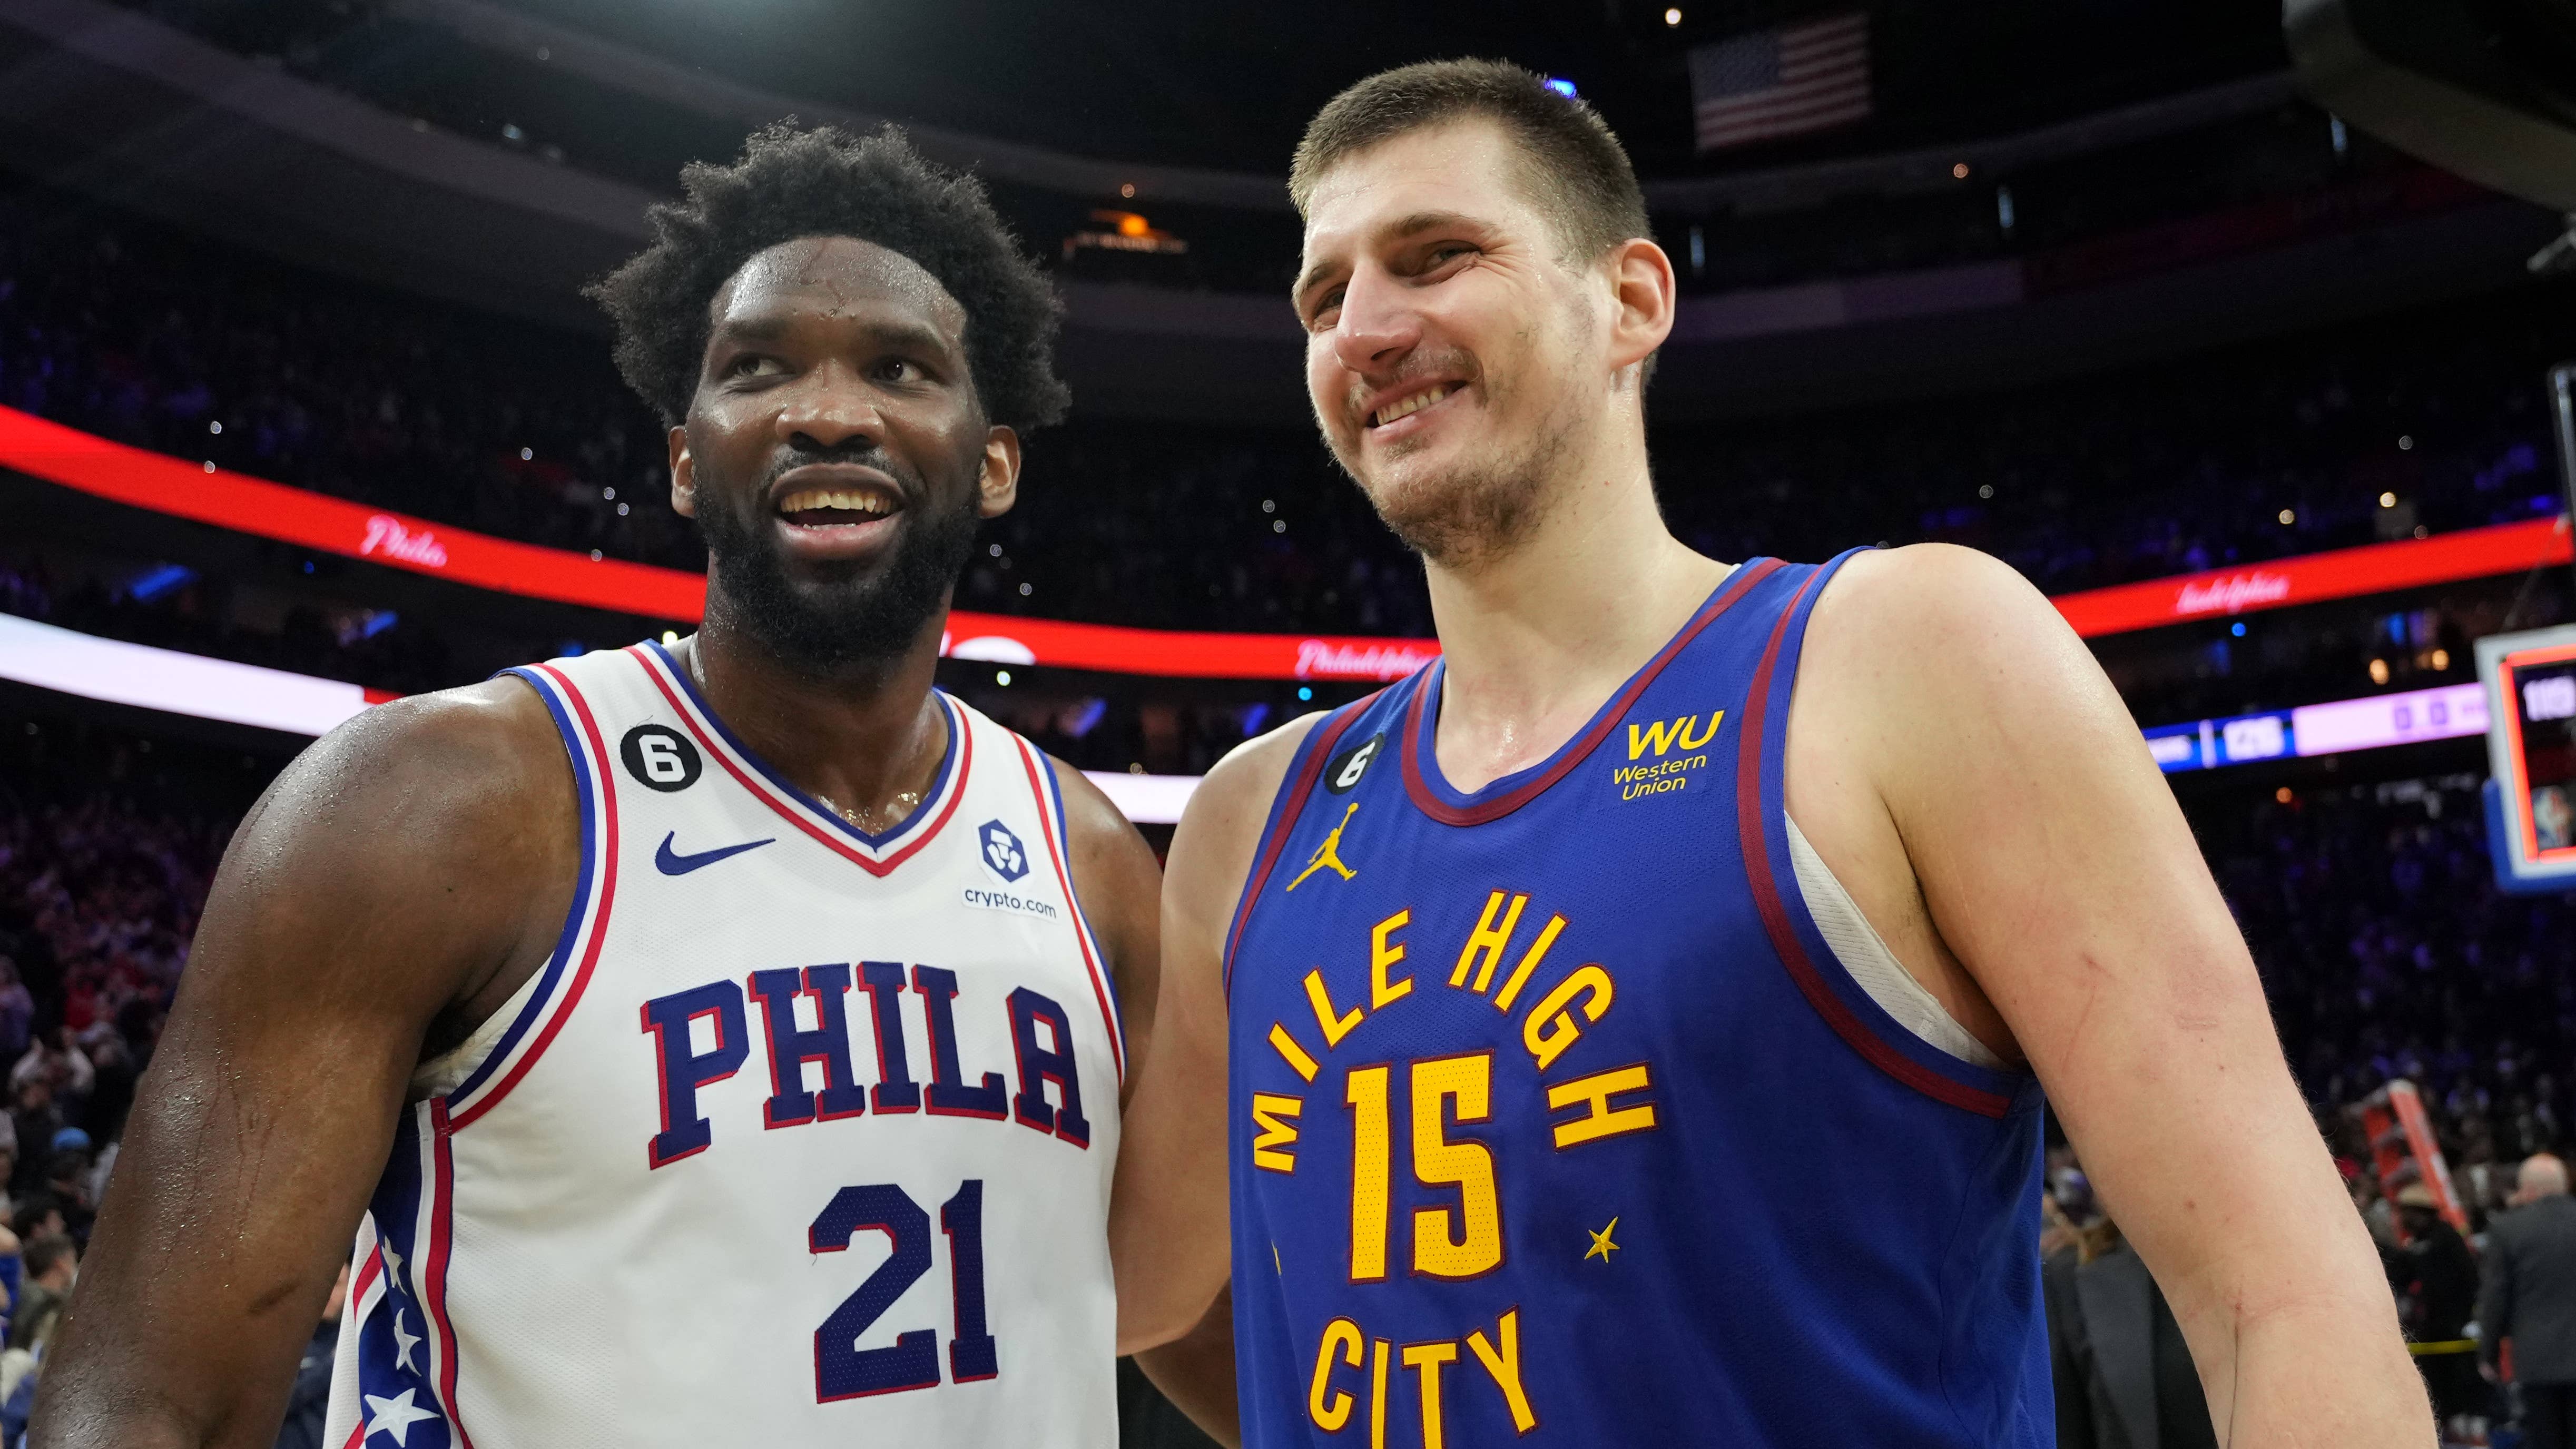 Nikola Jokic and Joel Embiid after a game